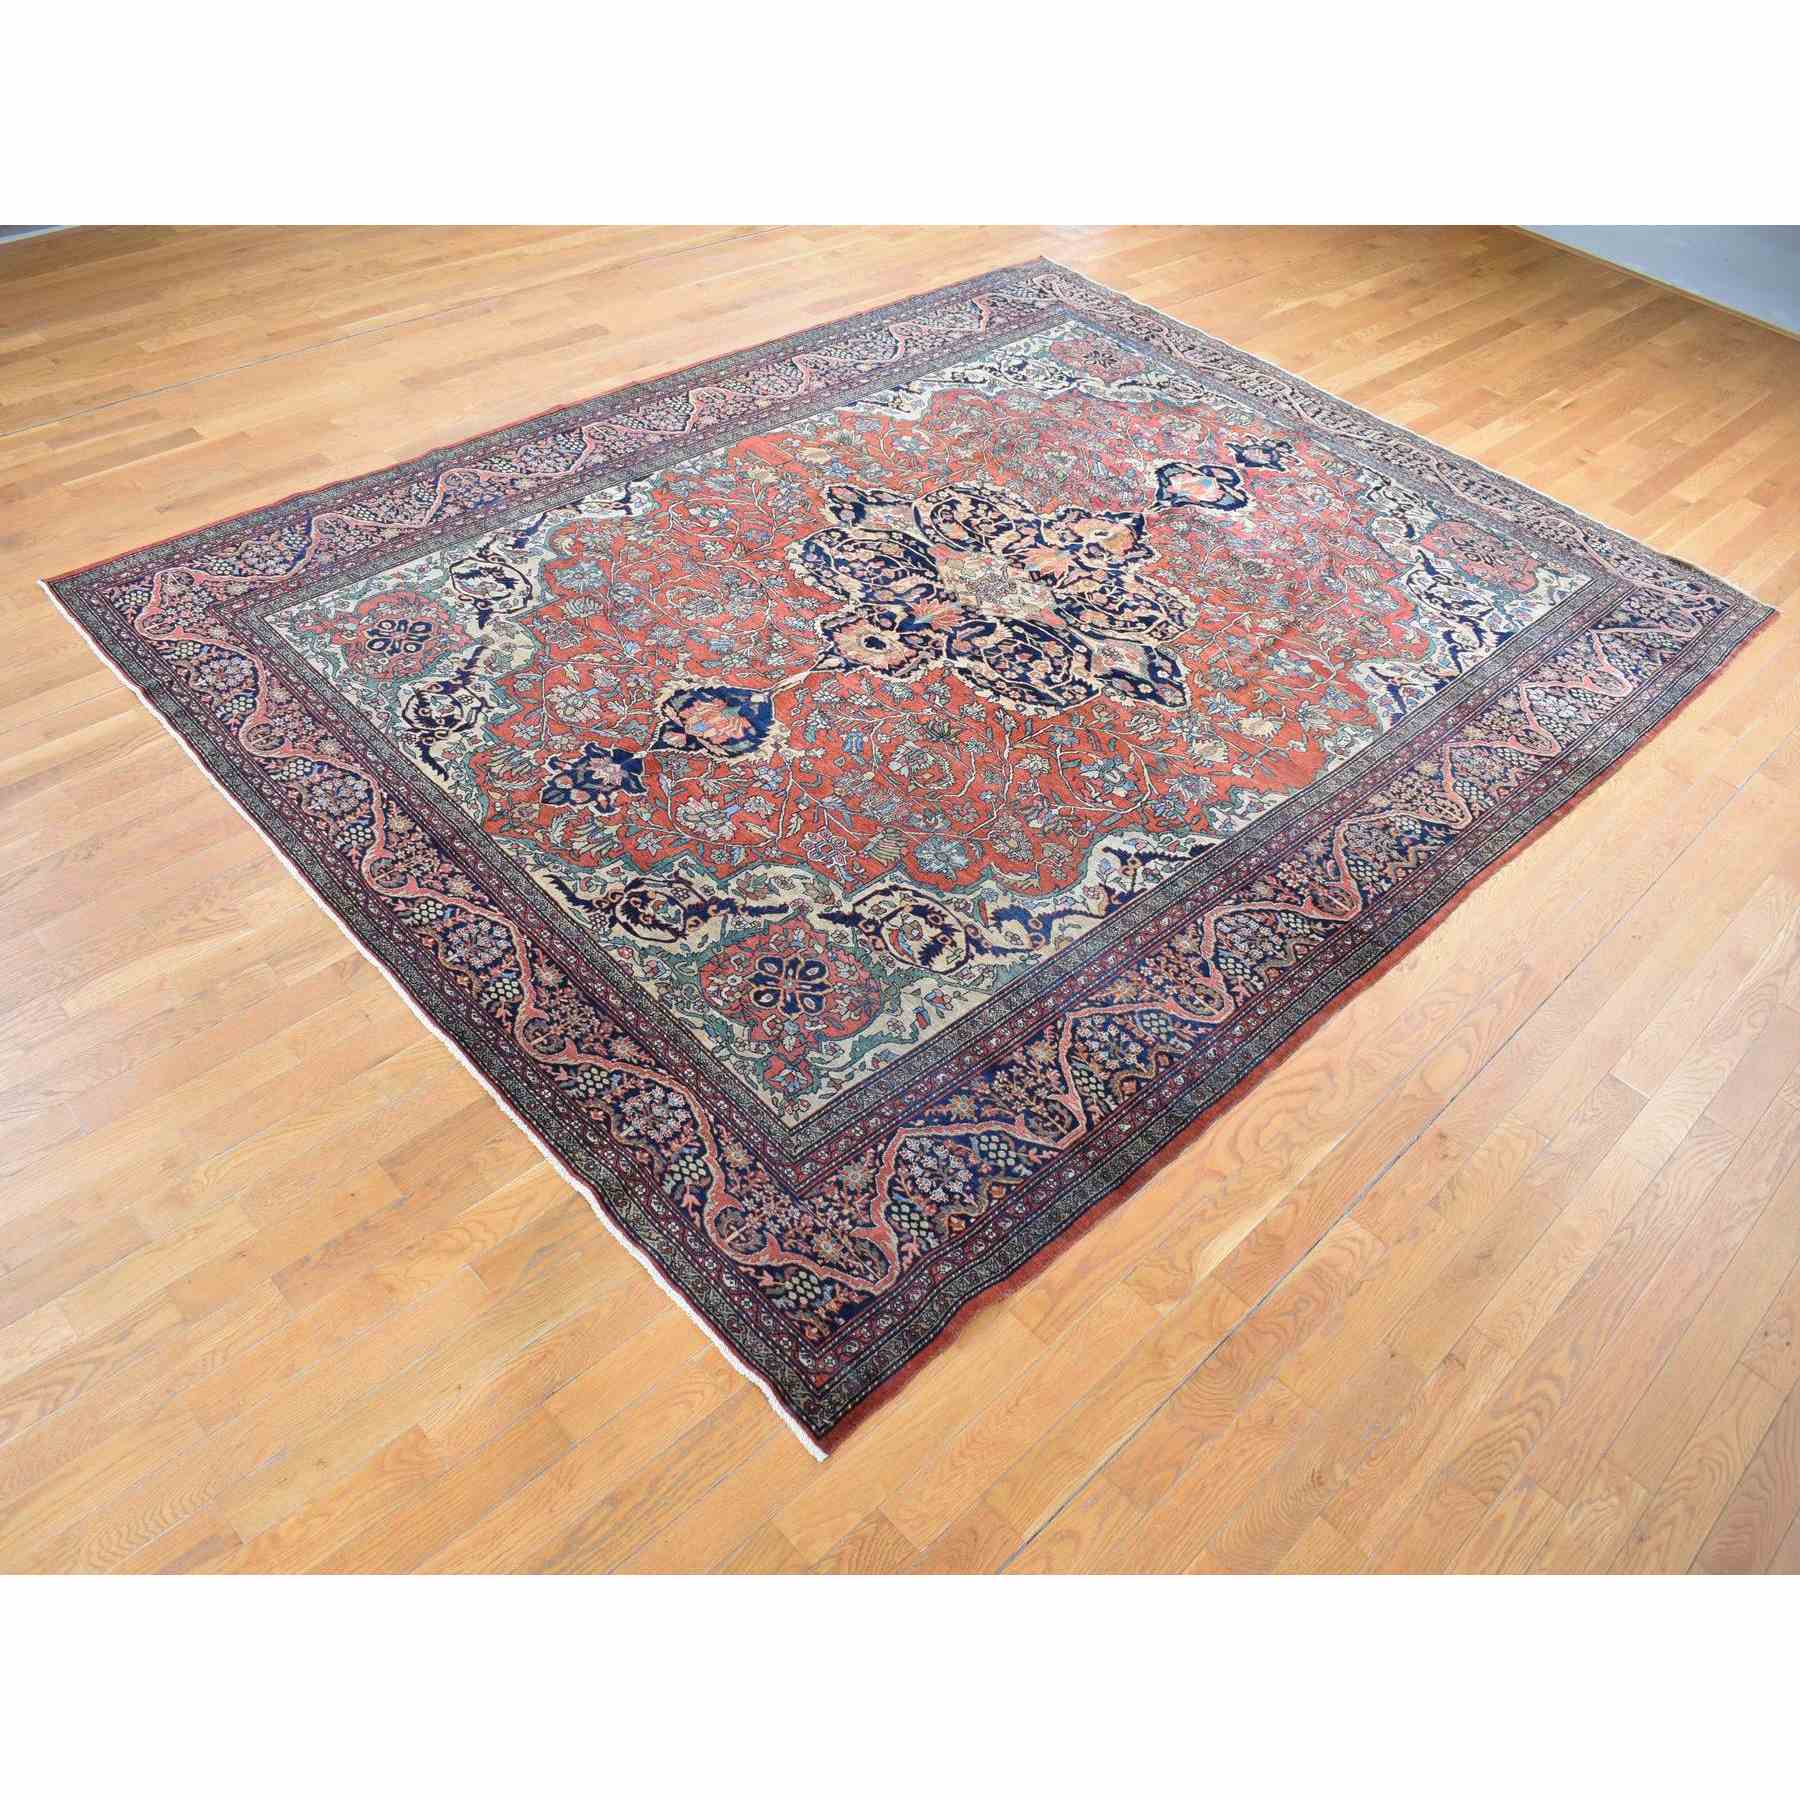 Antique-Hand-Knotted-Rug-403610